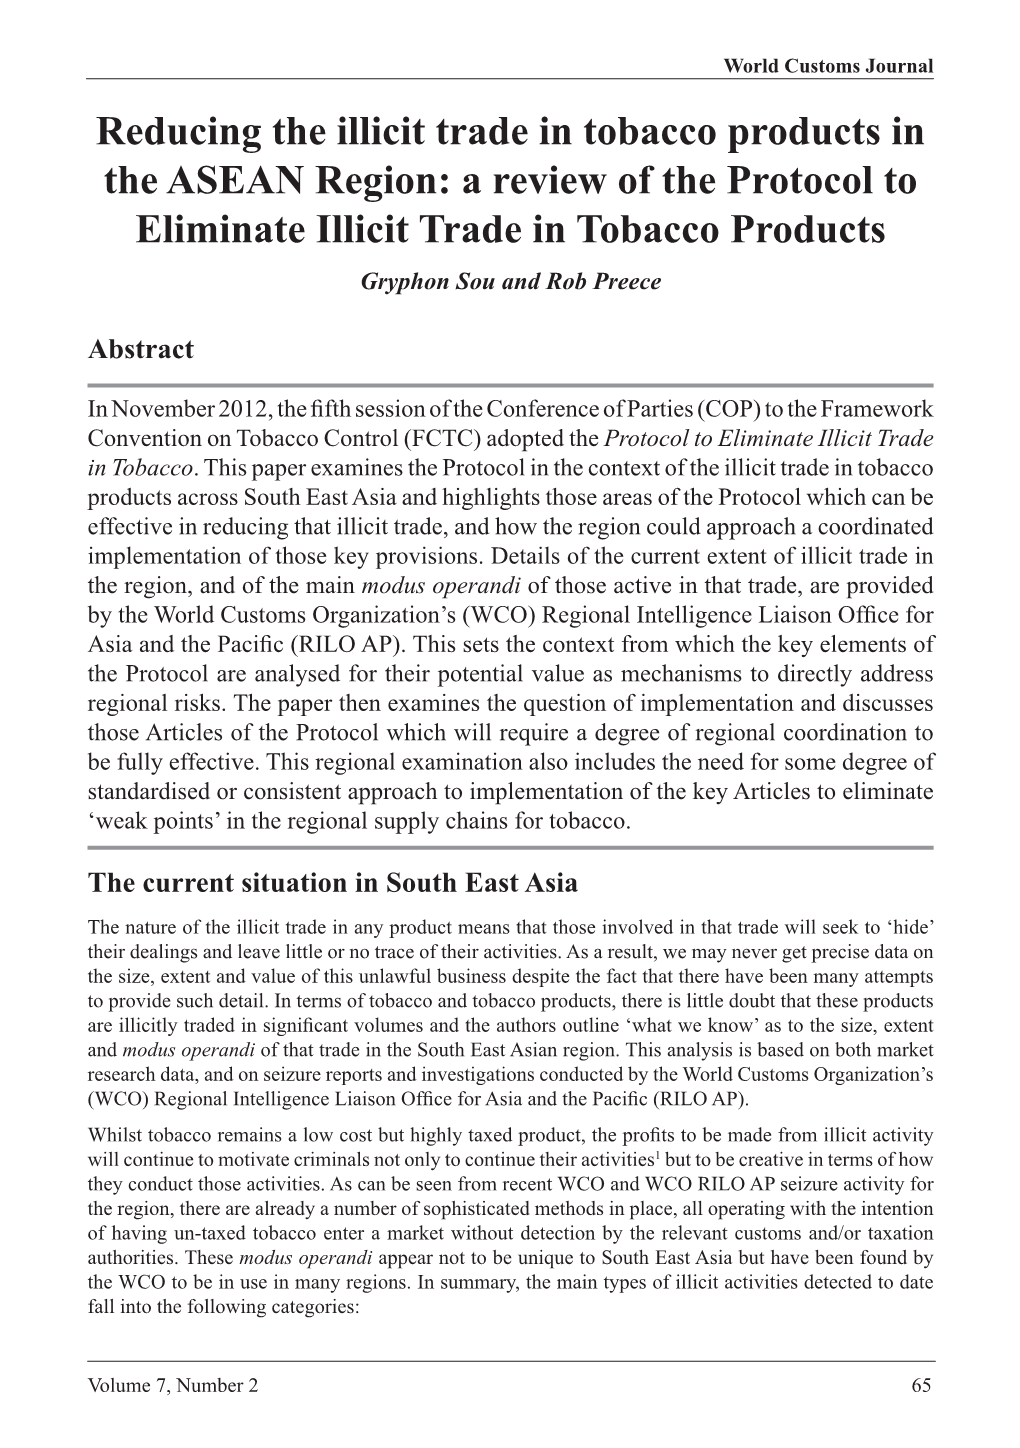 Reducing the Illicit Trade in Tobacco Products in the ASEAN Region: a Review of the Protocol to Eliminate Illicit Trade in Tobacco Products Gryphon Sou and Rob Preece